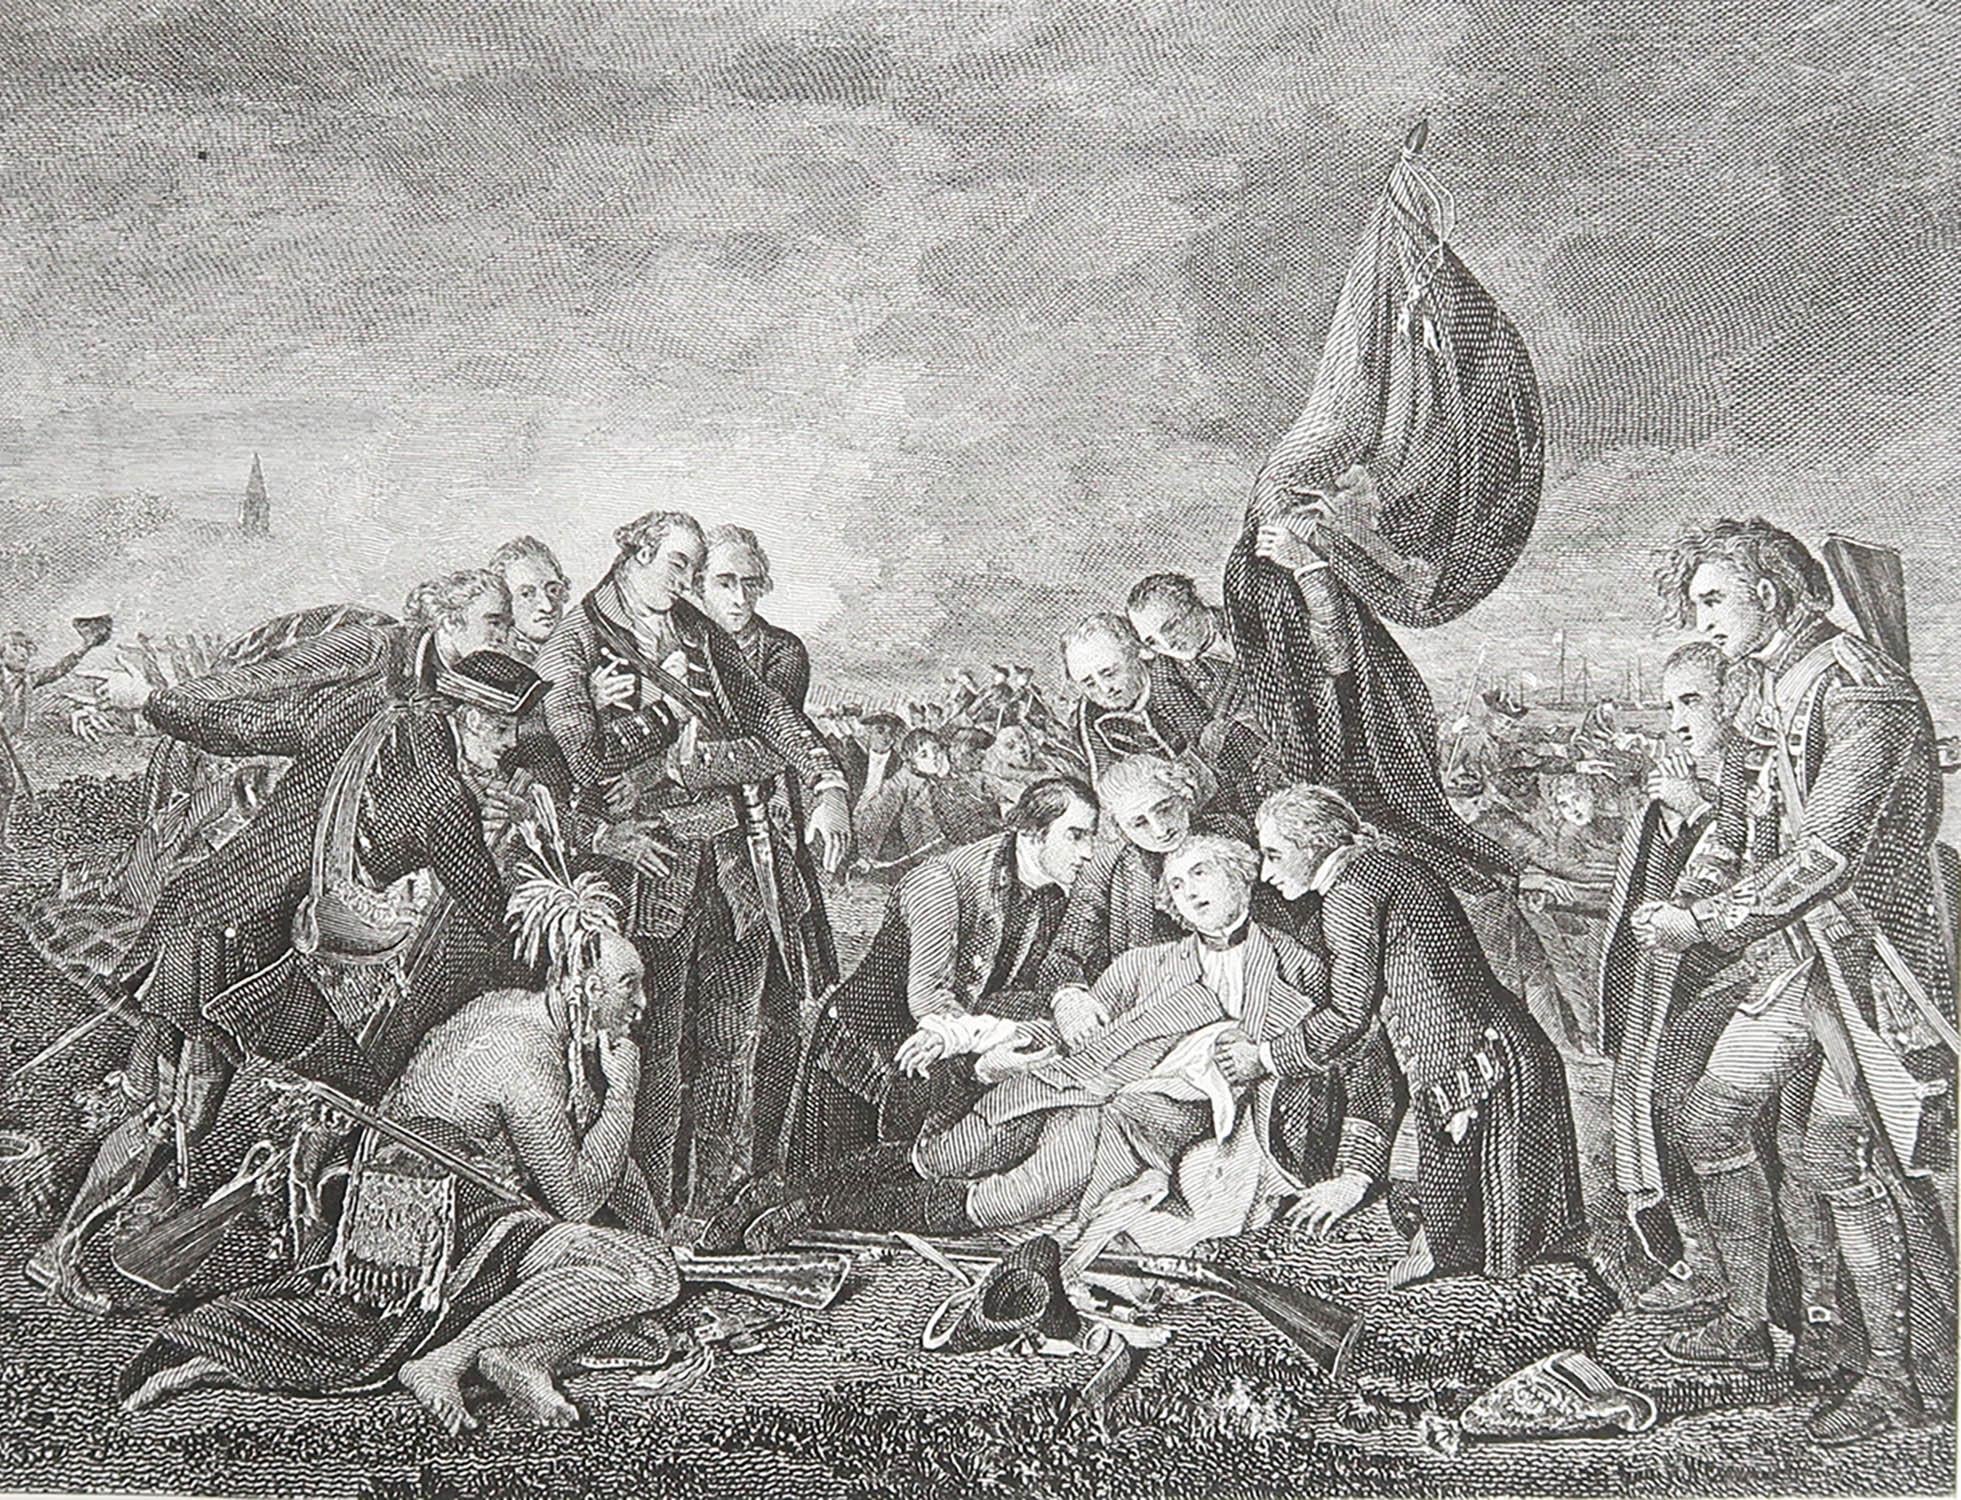 Wonderful image of The Death of General Wolfe In the Battle of Quebec

Fine steel engraving 

Published by Kelly circa 1850

Unframed.

